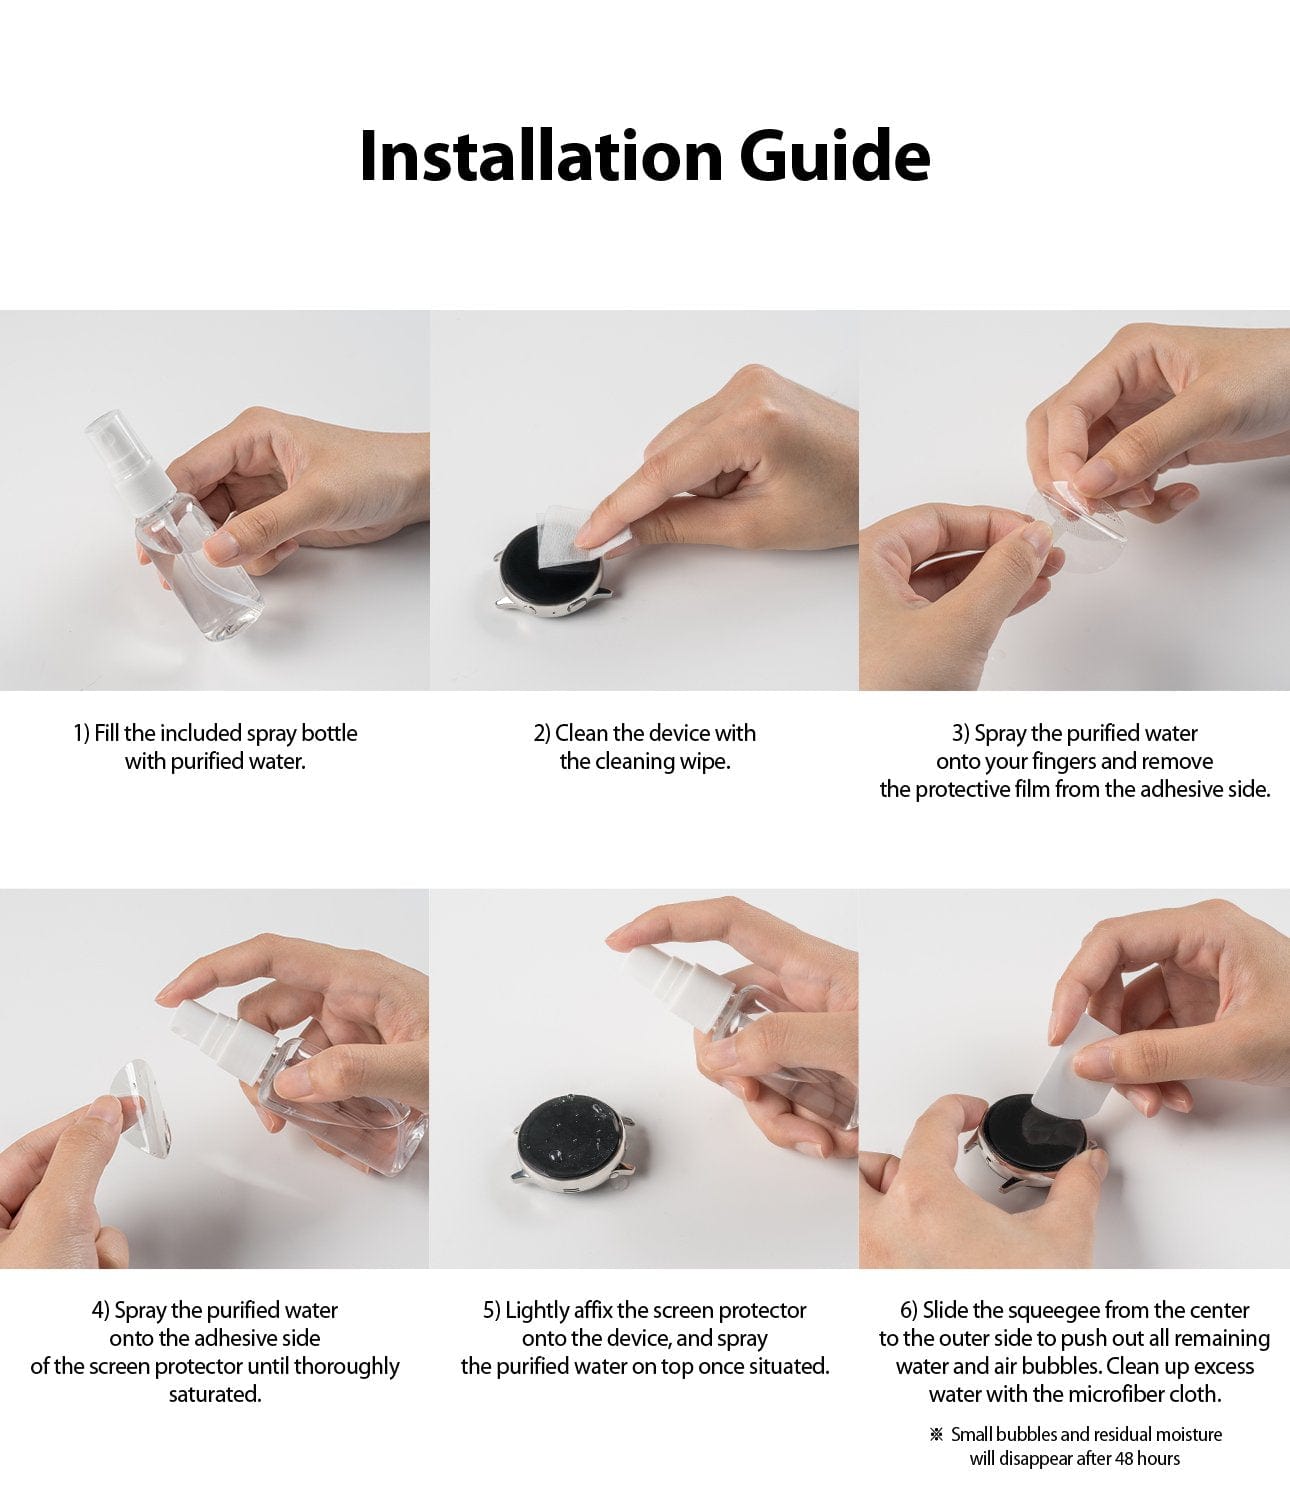 Installation guide to install the Apple Watch Screen Protector